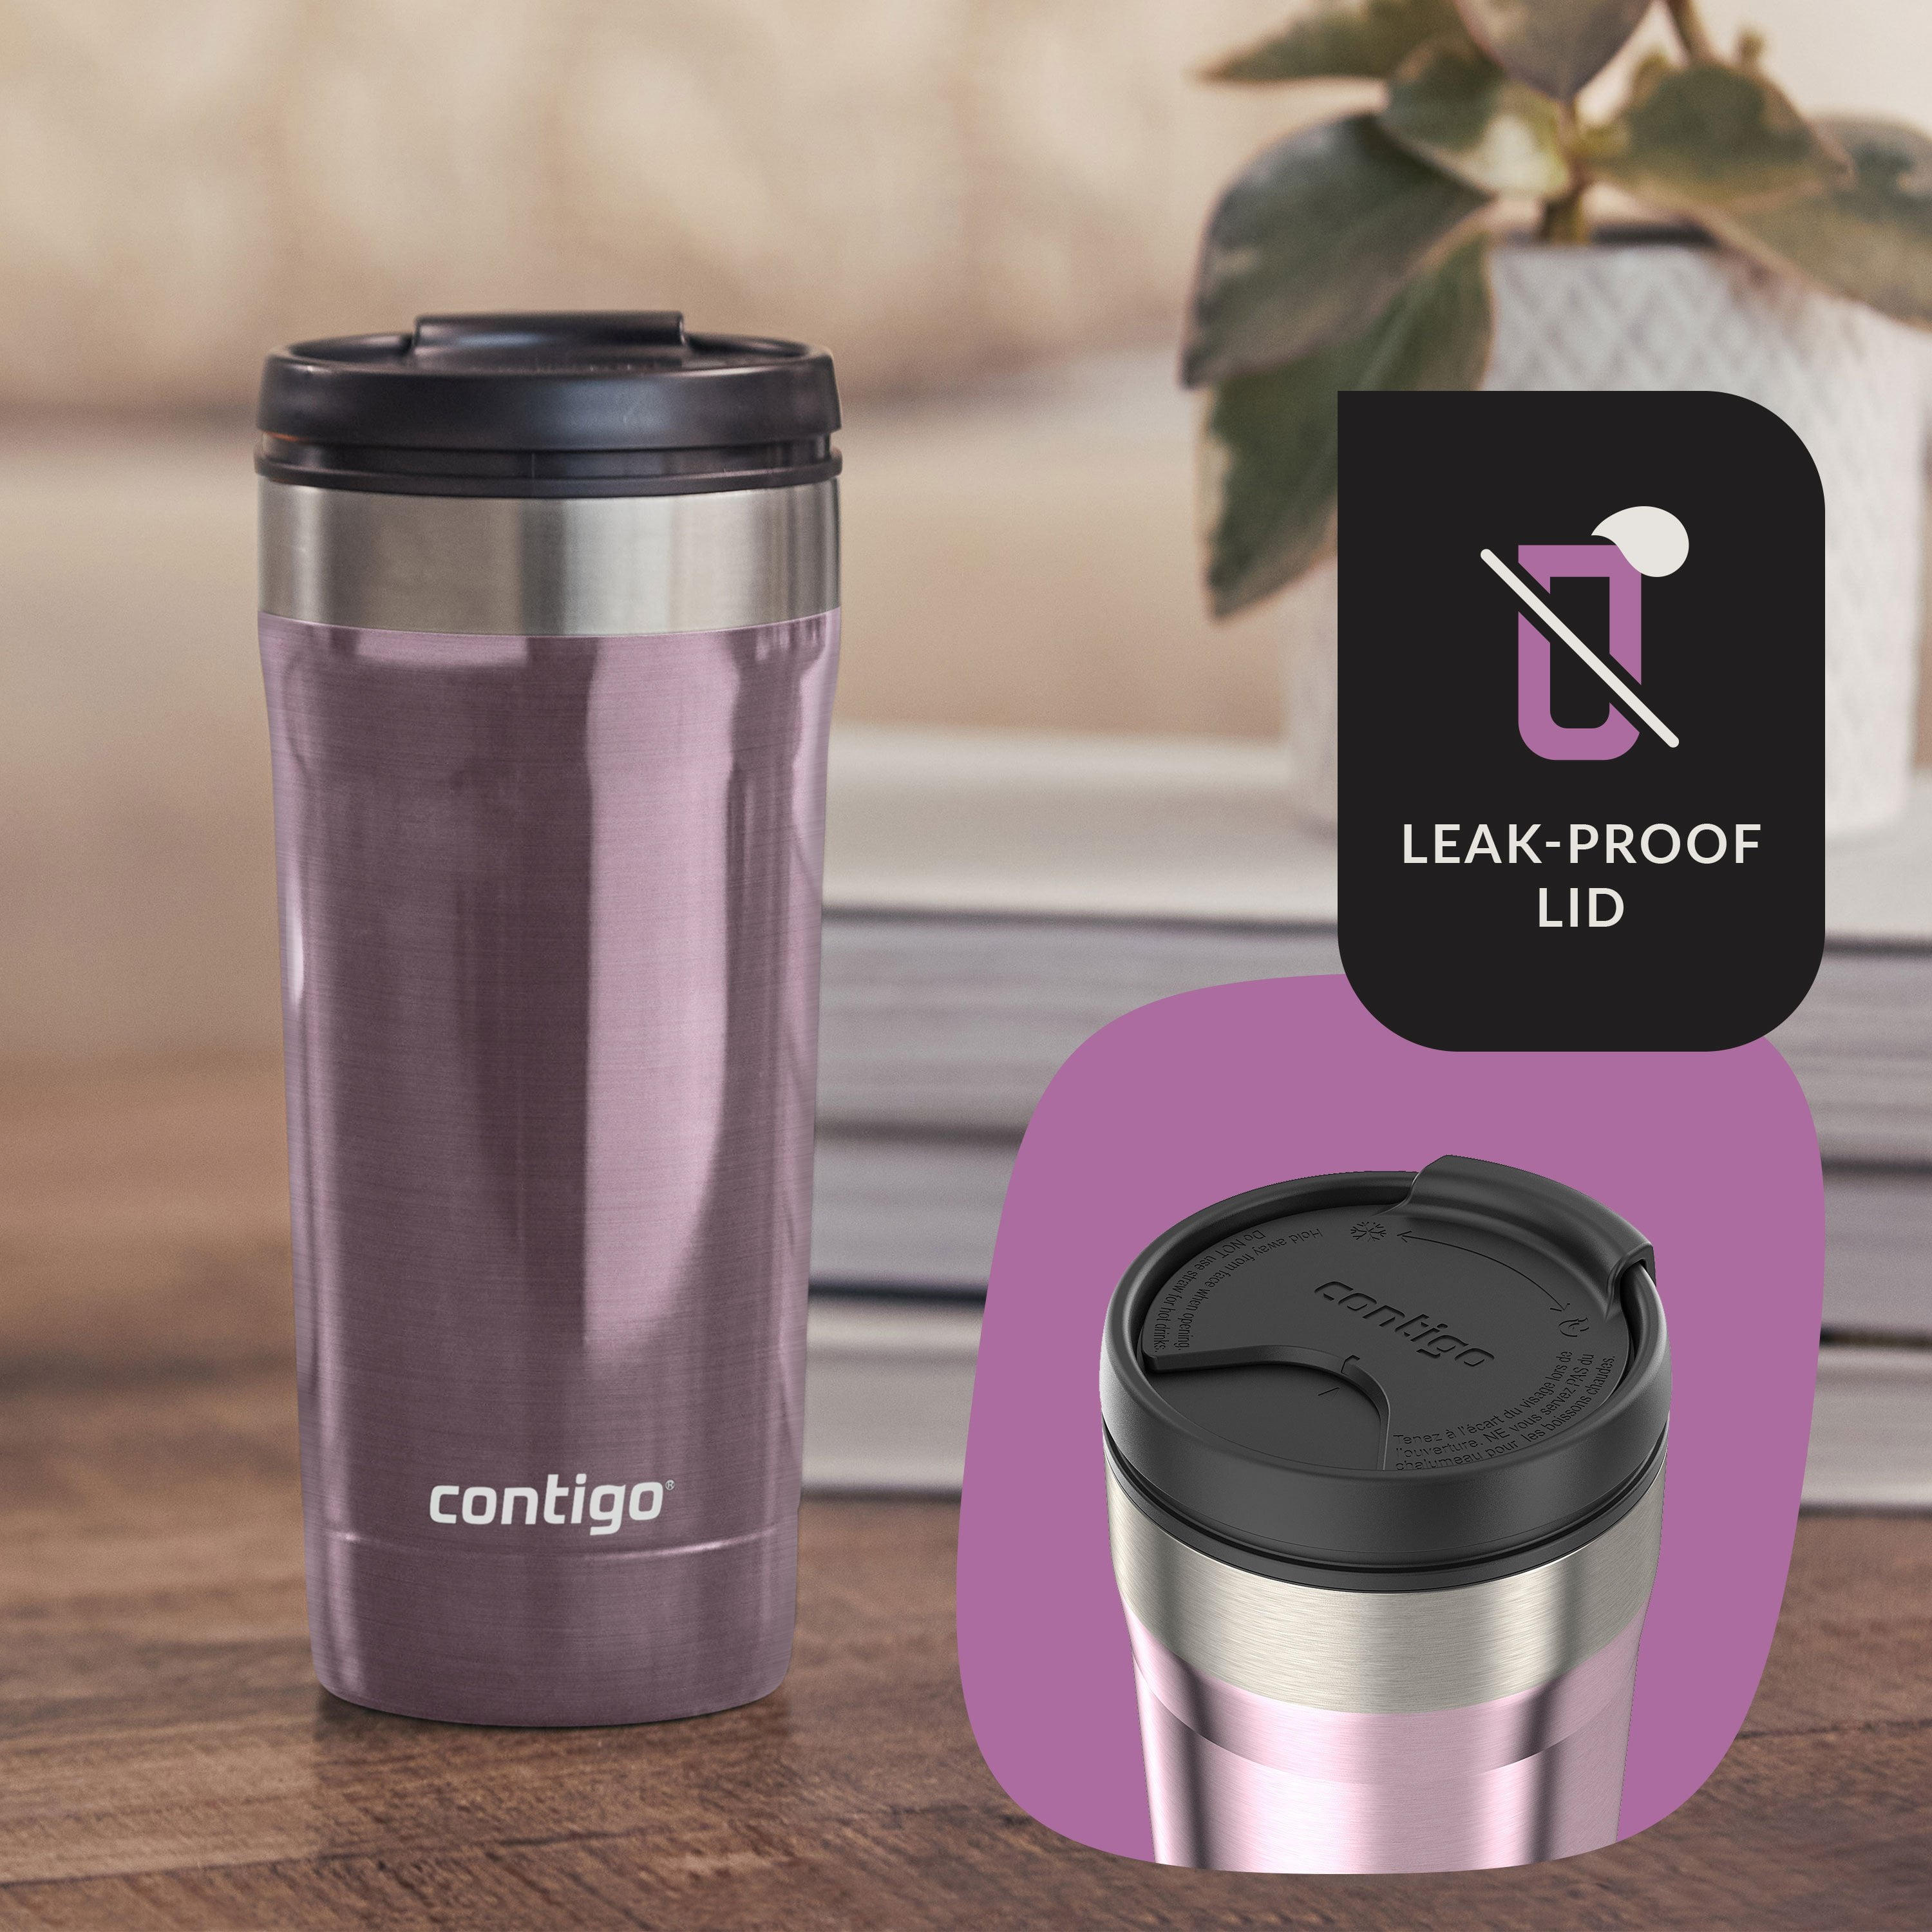 Contingo Uptown 24 oz Dark Ice Dual-Sip Insulated Tumbler Delivery